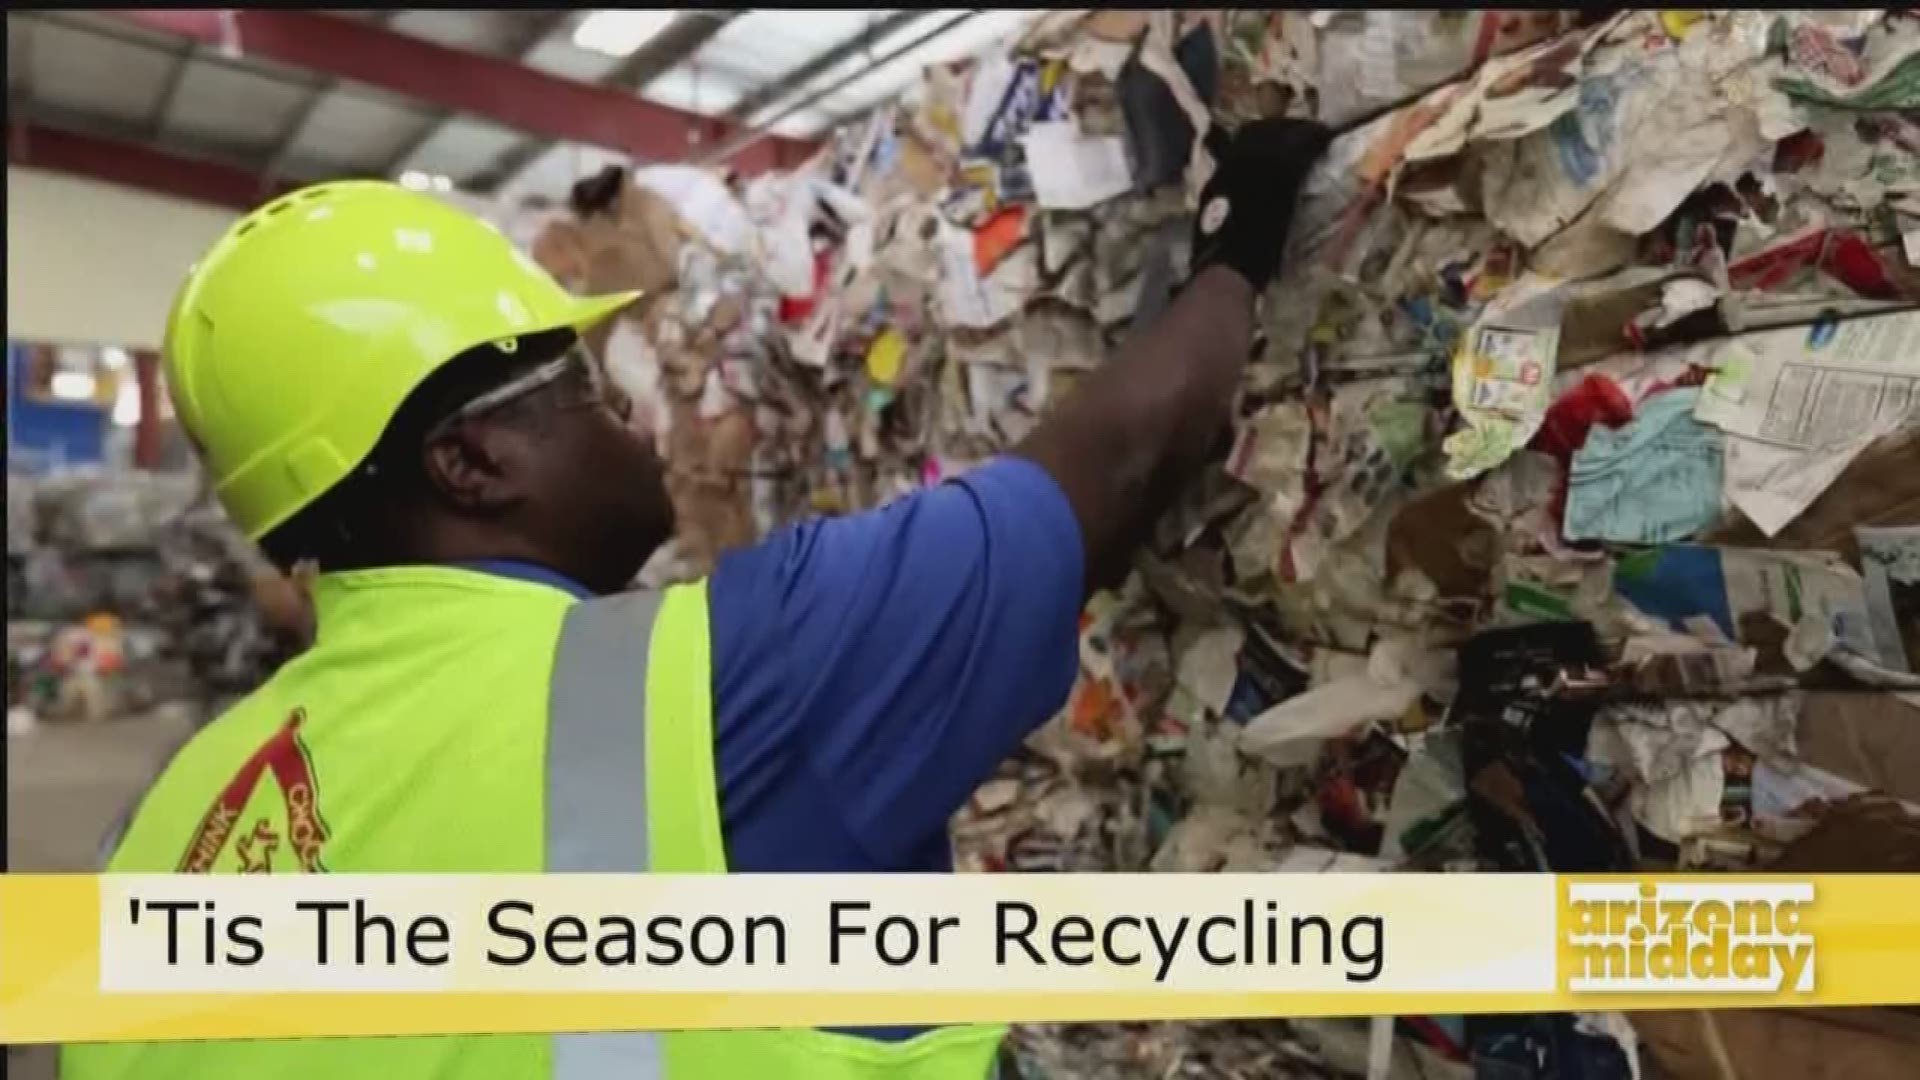 Jeremy Walters with Republic Services tells us how to become a better recycler as the holiday season approaches.